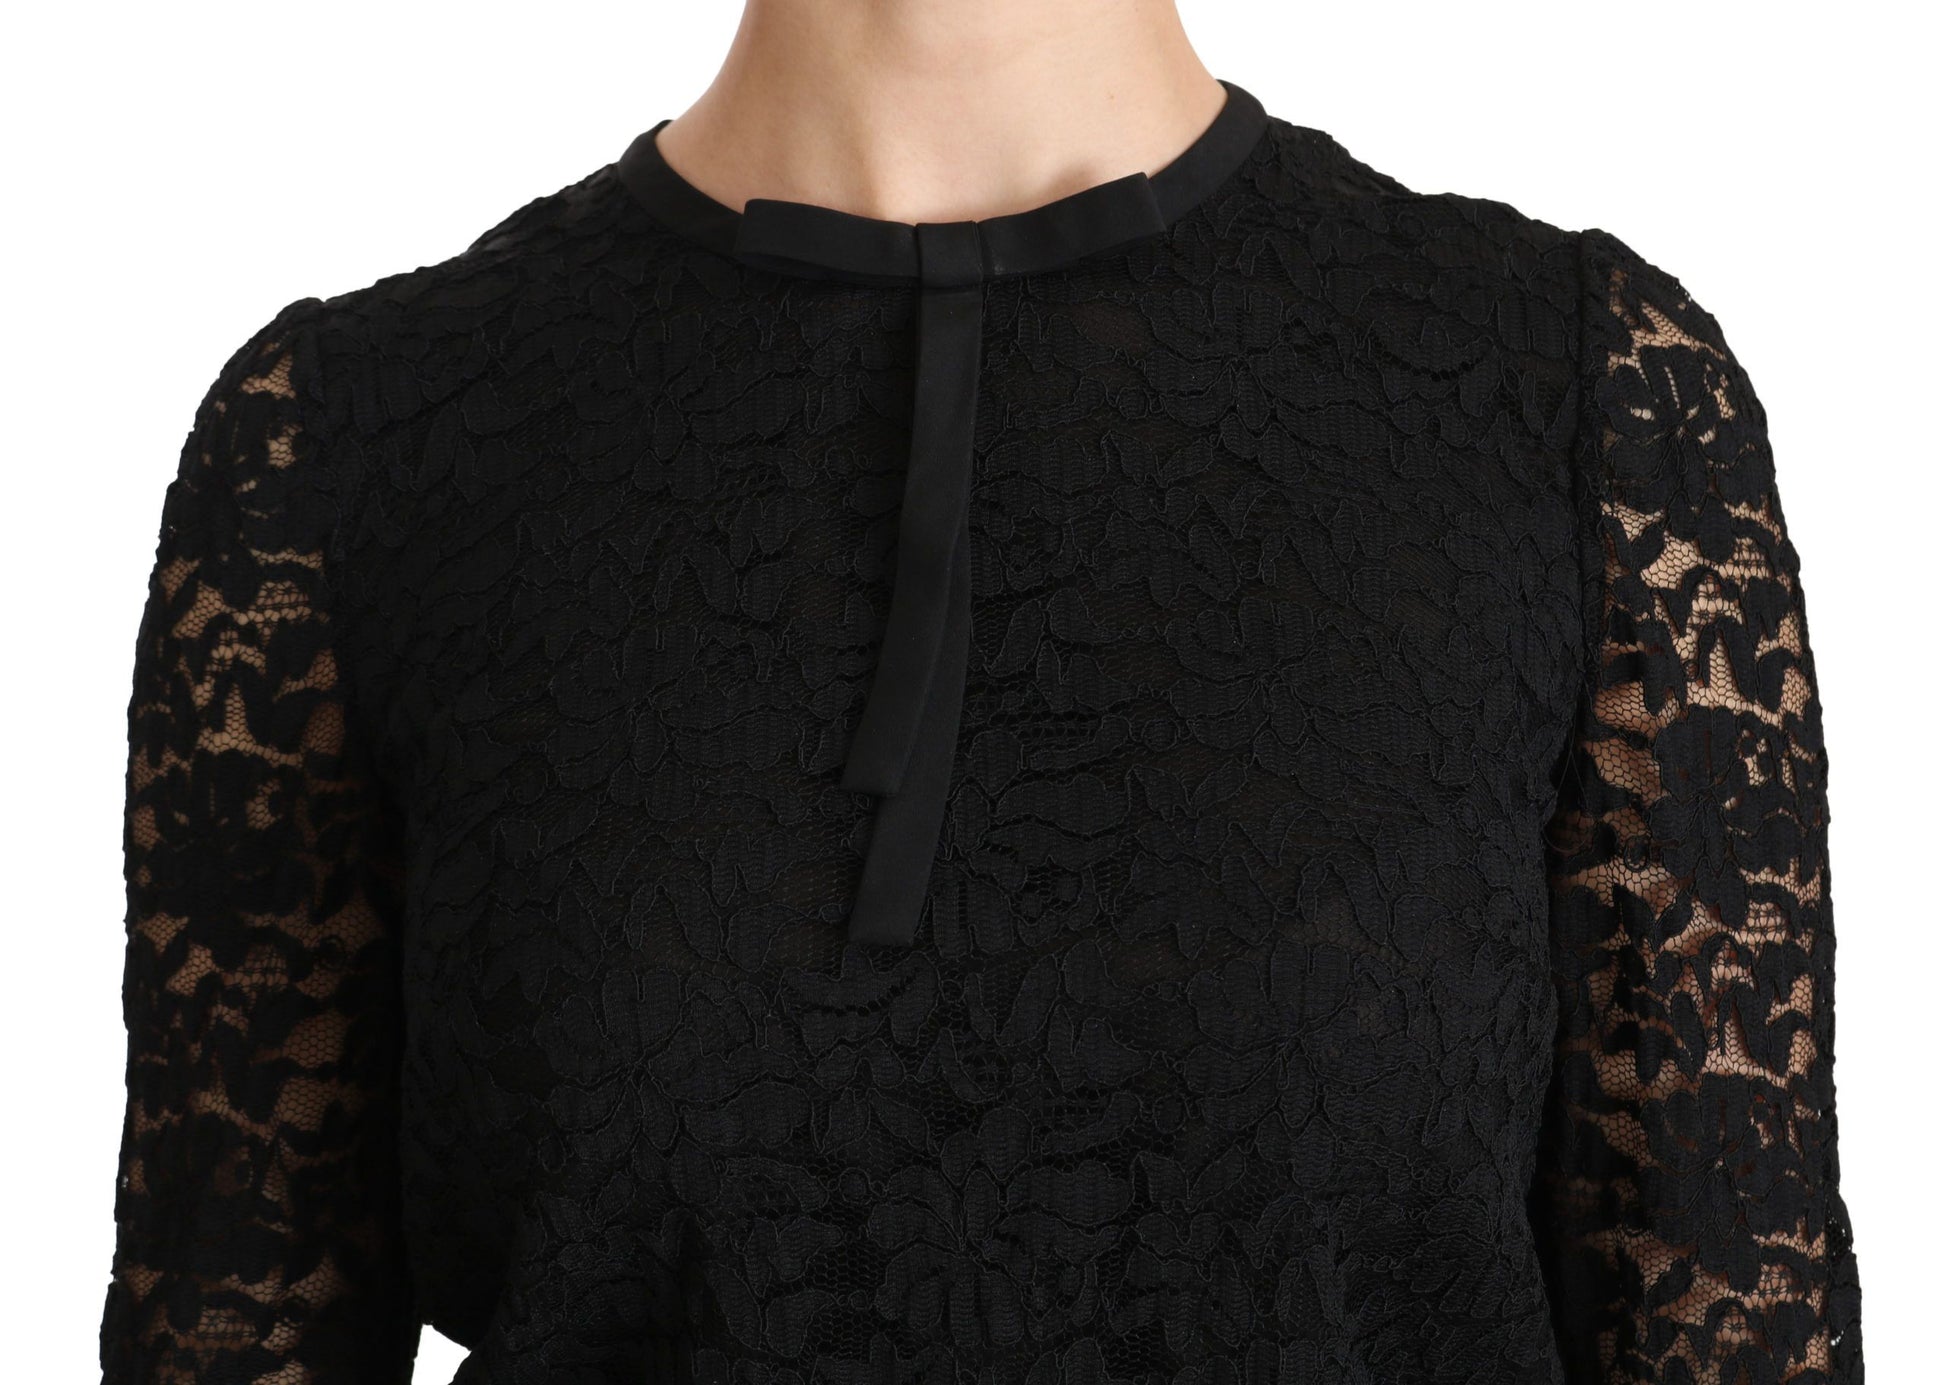 Black Lace Long Sleeve Nylon Blouse - Designed by Dolce & Gabbana Available to Buy at a Discounted Price on Moon Behind The Hill Online Designer Discount Store